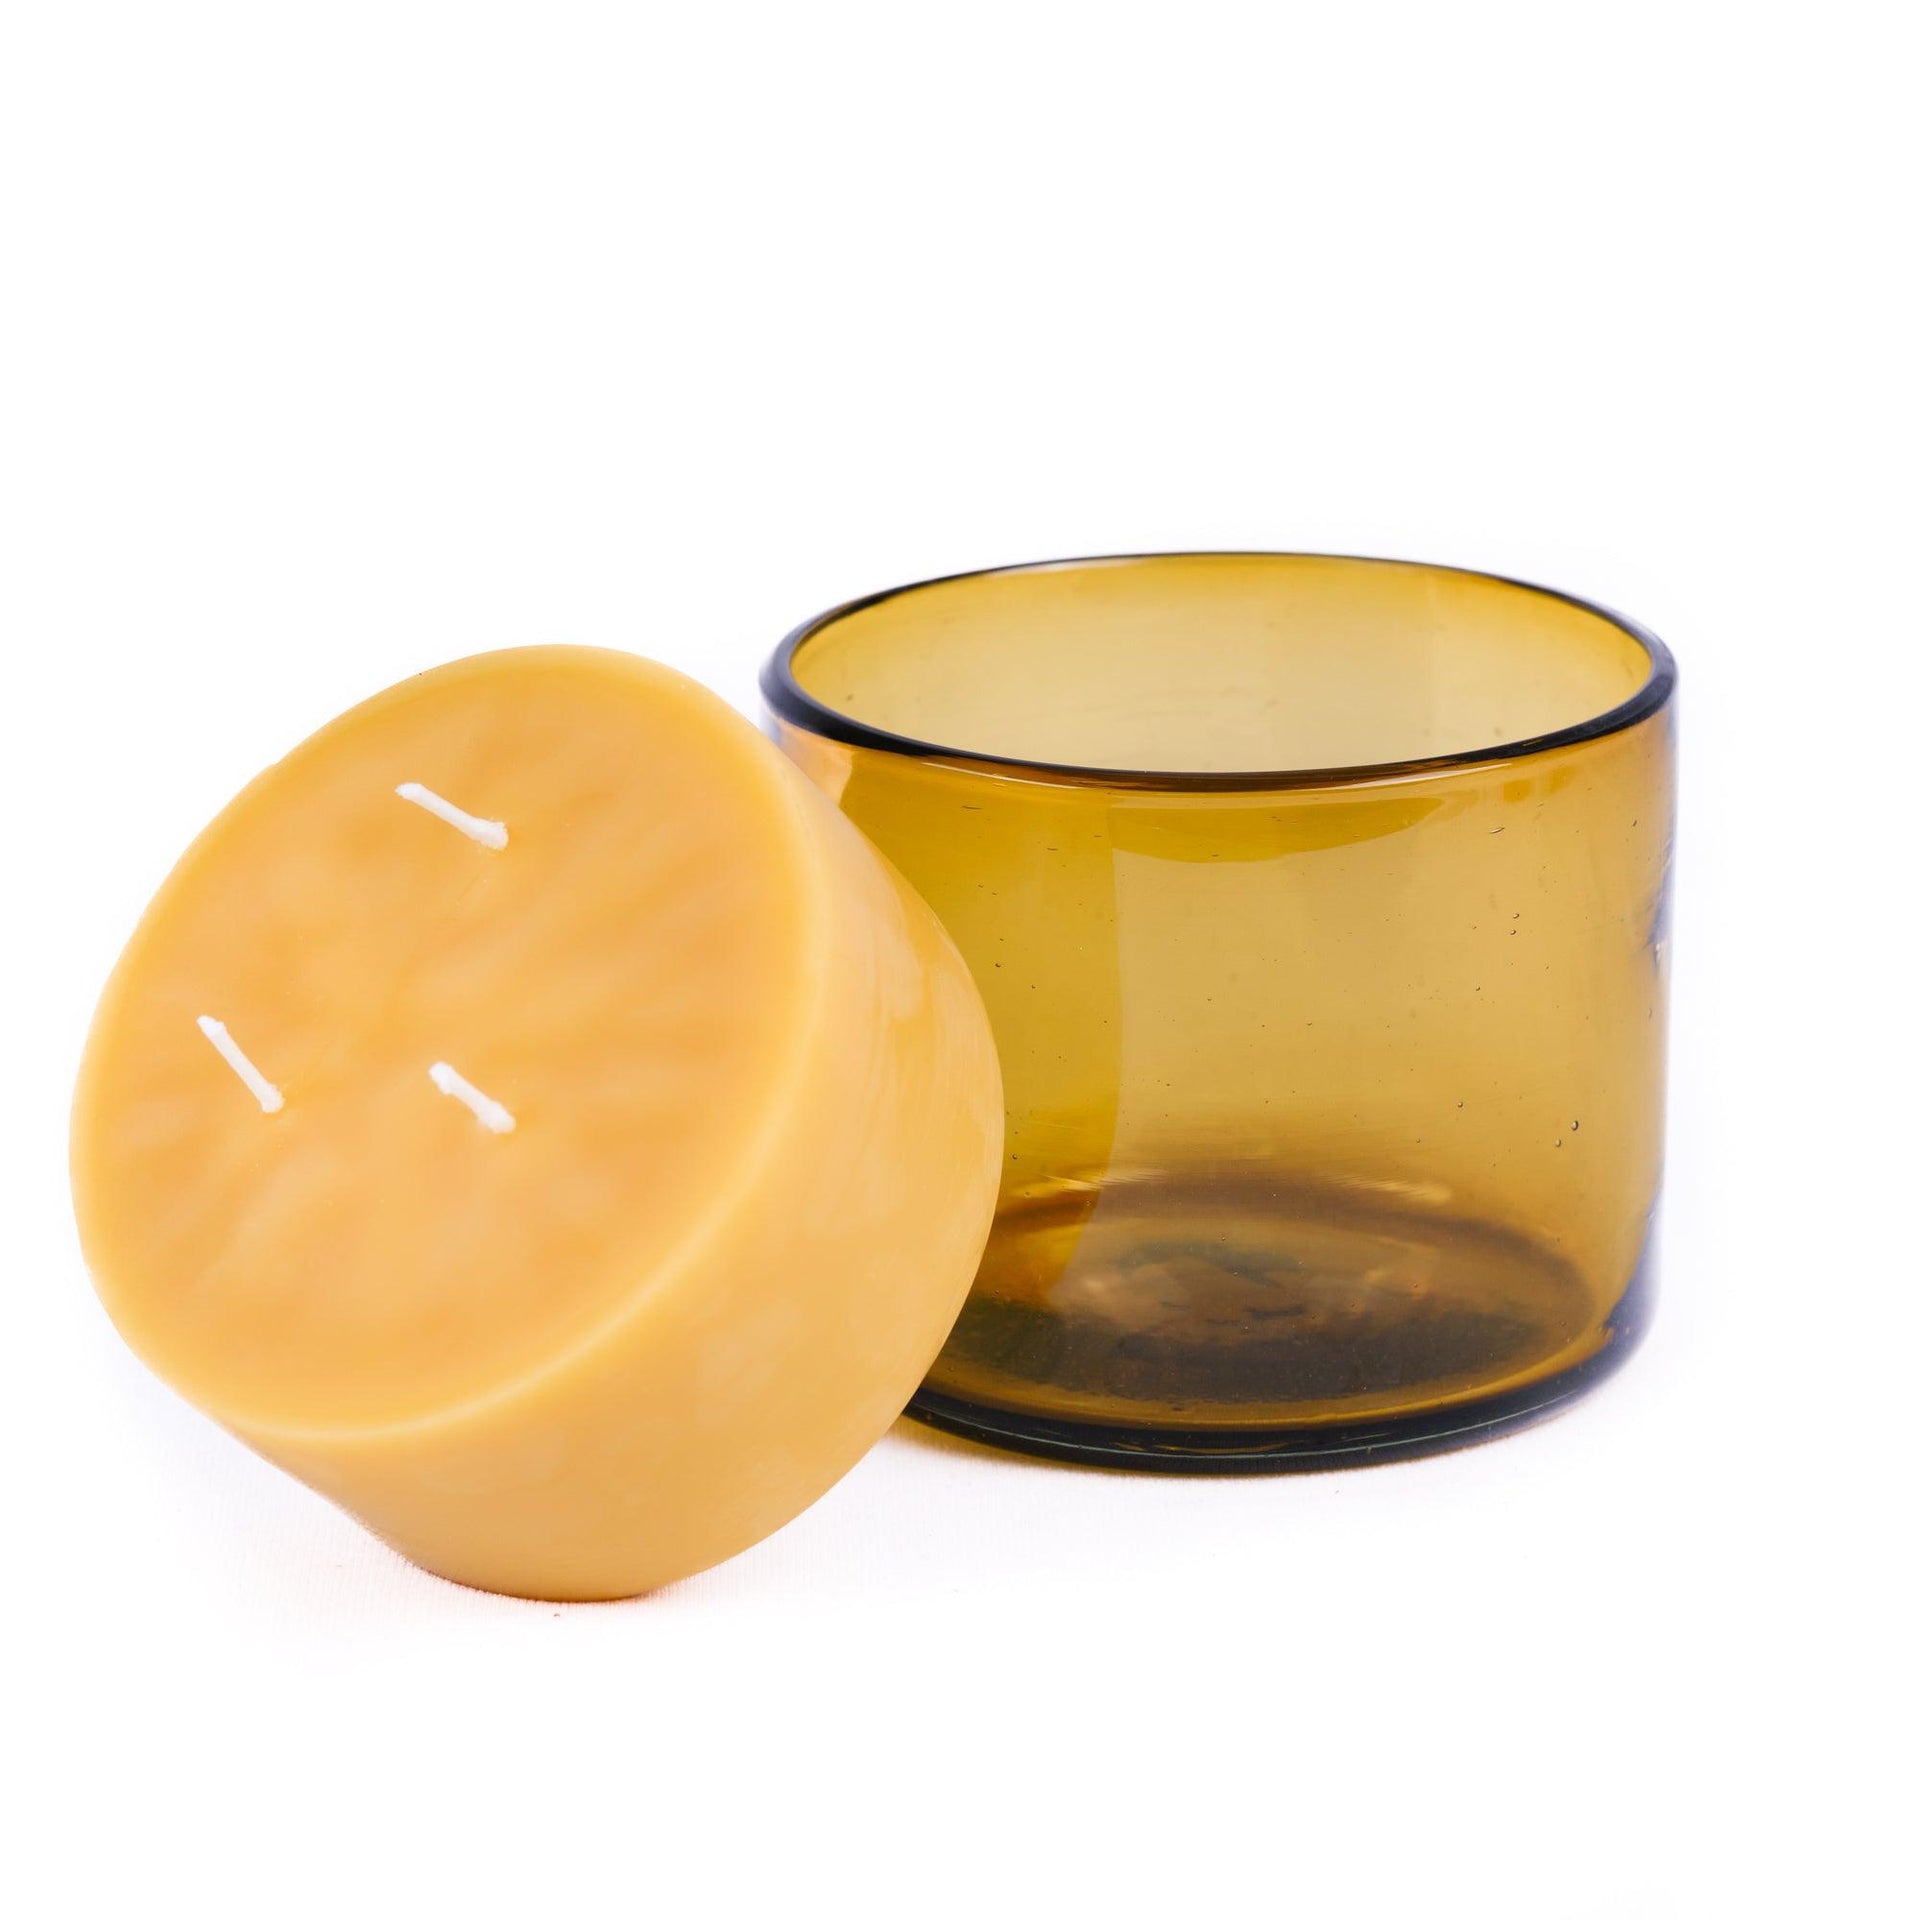 Pure Beeswax Refill Candle for Blown Glass Holder – Bluecorn Candles